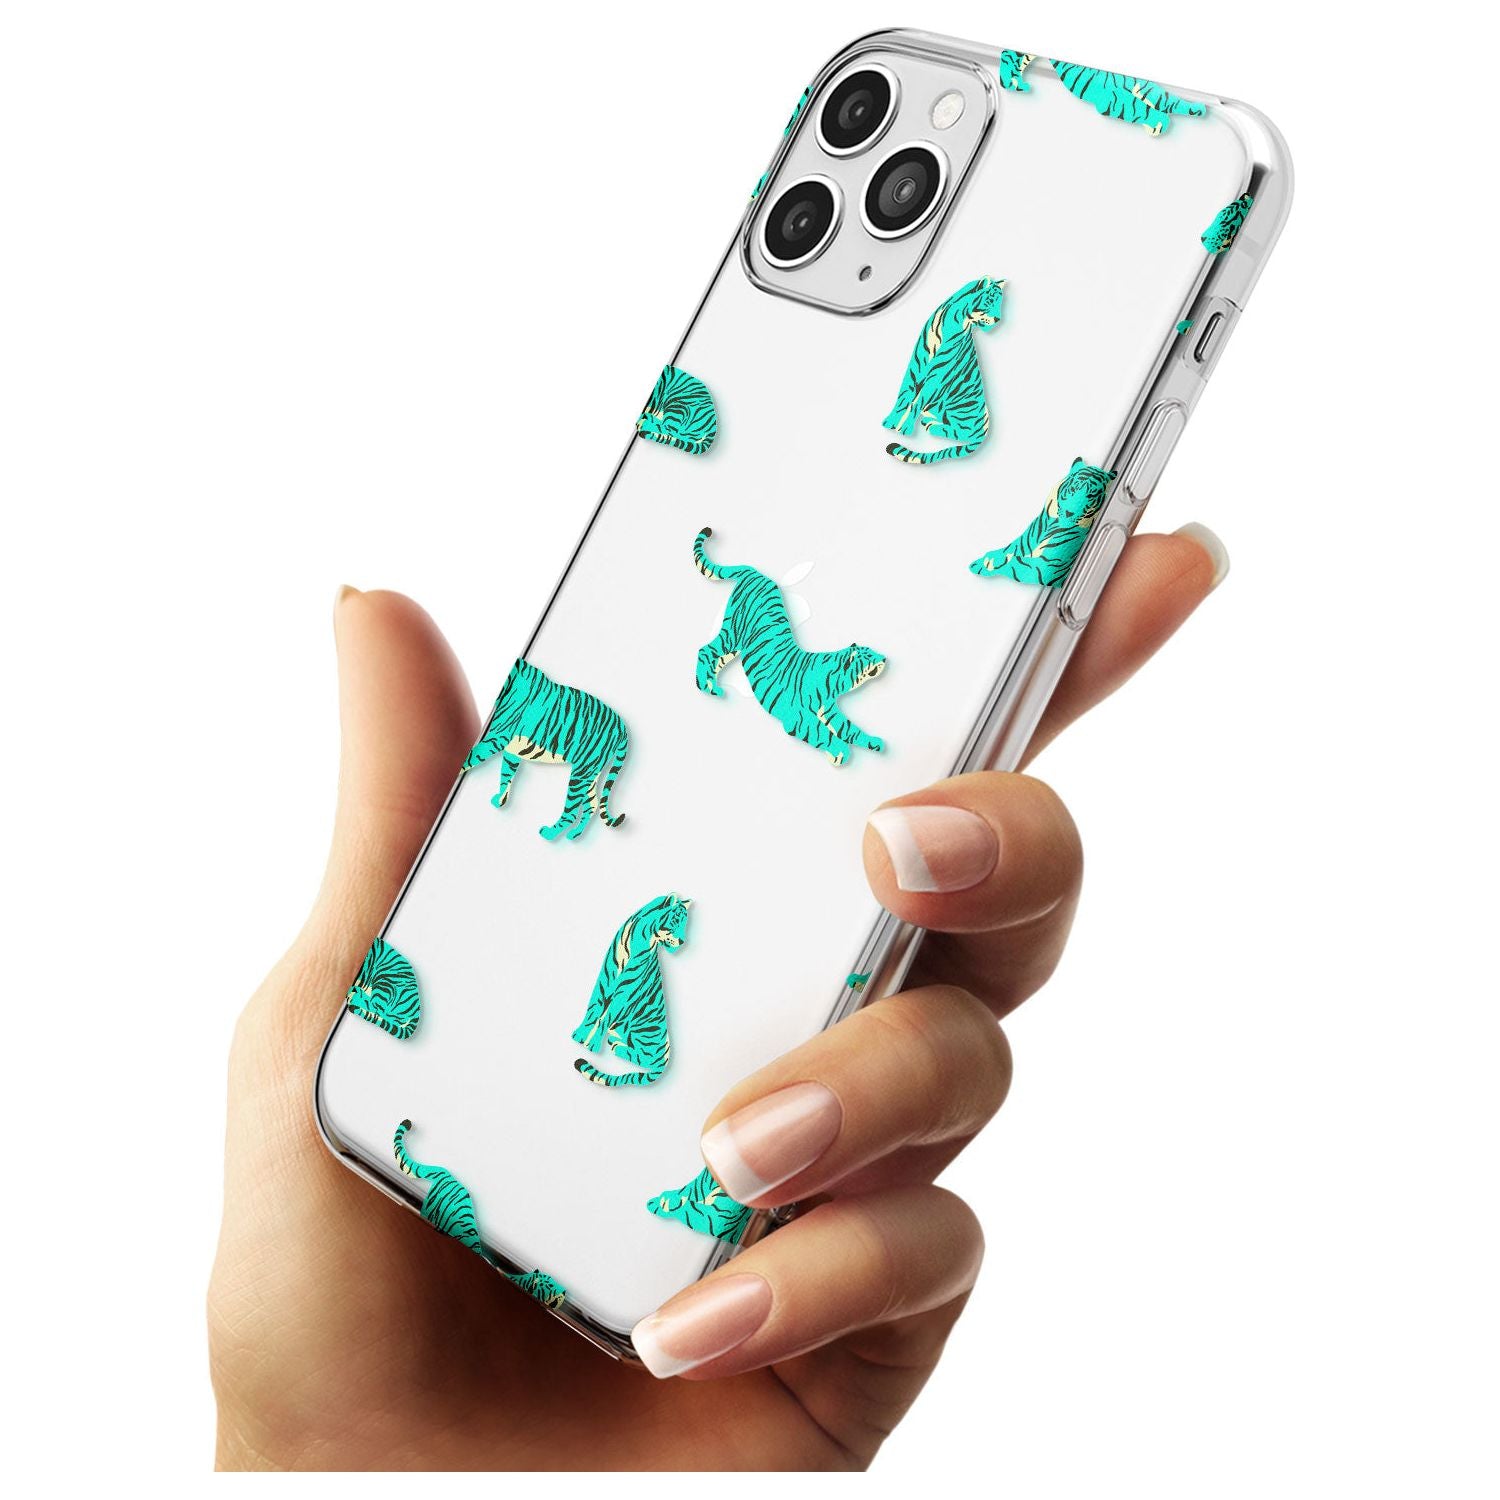 Turquoise Tiger Jungle Cat Pattern Slim TPU Phone Case for iPhone 11 Pro Max